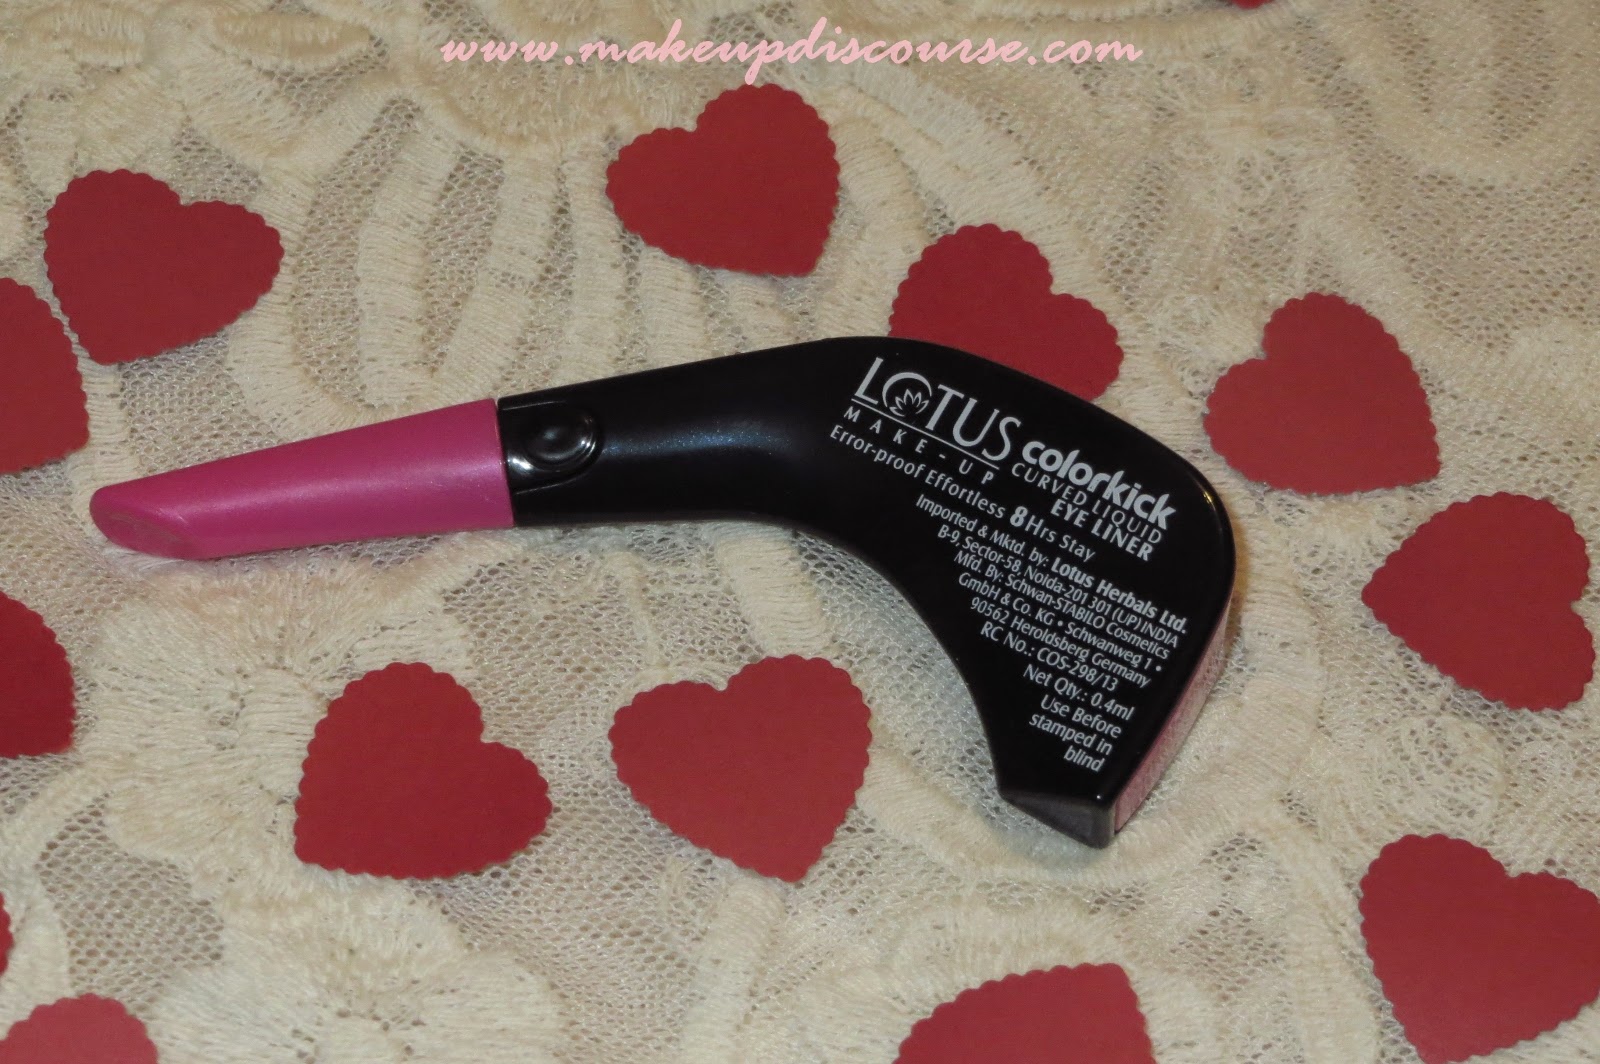 Lotus Colorkick Curved Liquid Eyeliner Review